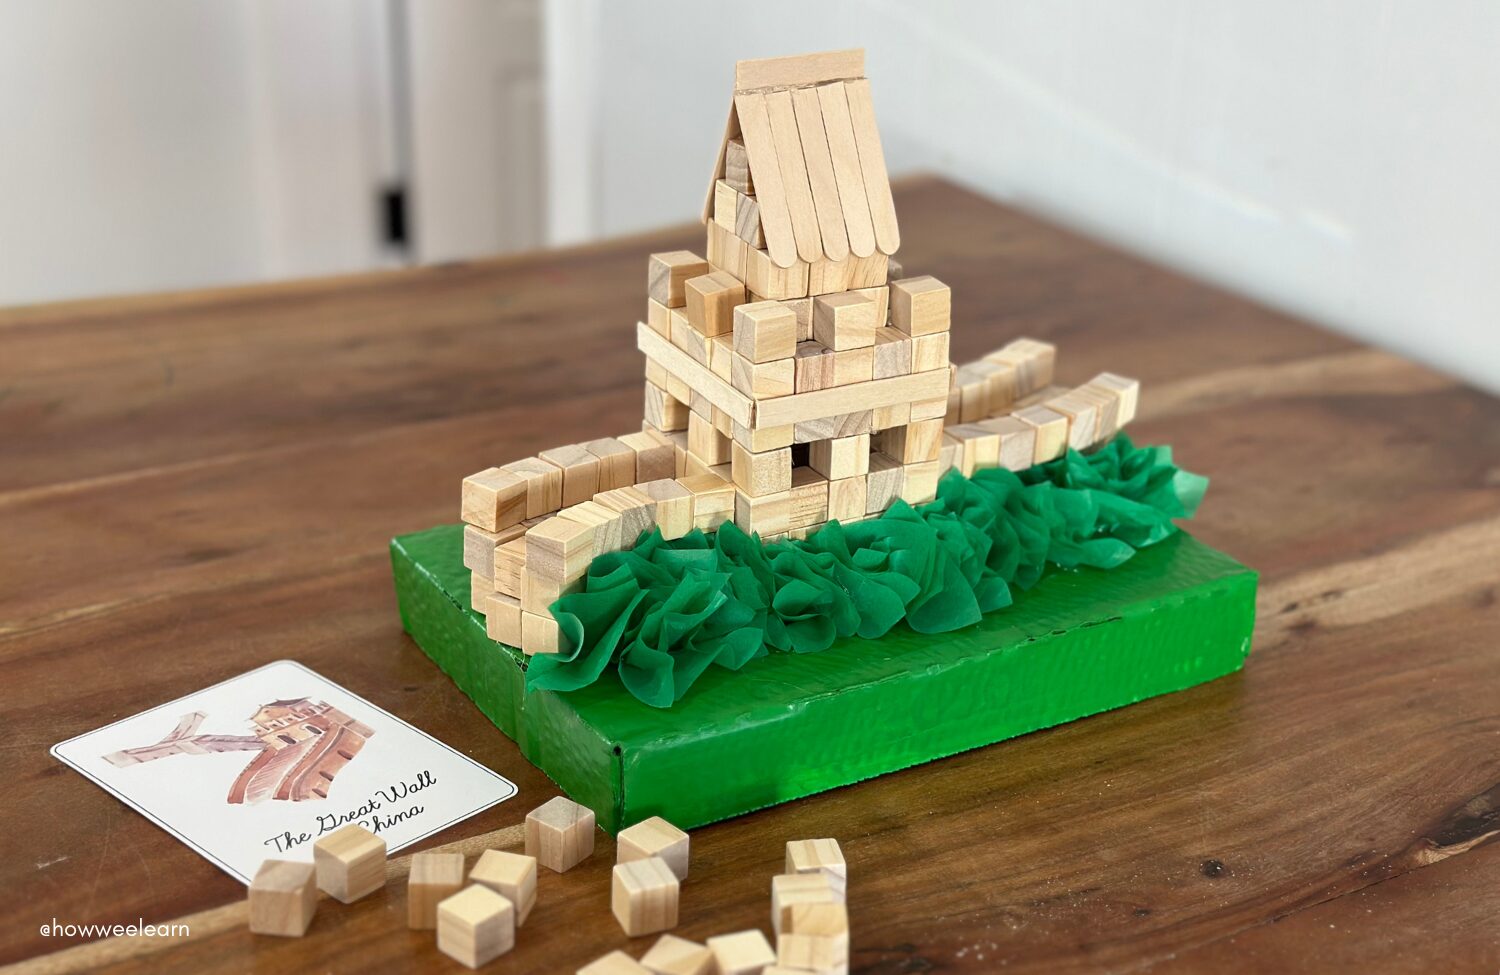 Building The Great Wall of China with small wooden blocks, architecture activity for kids